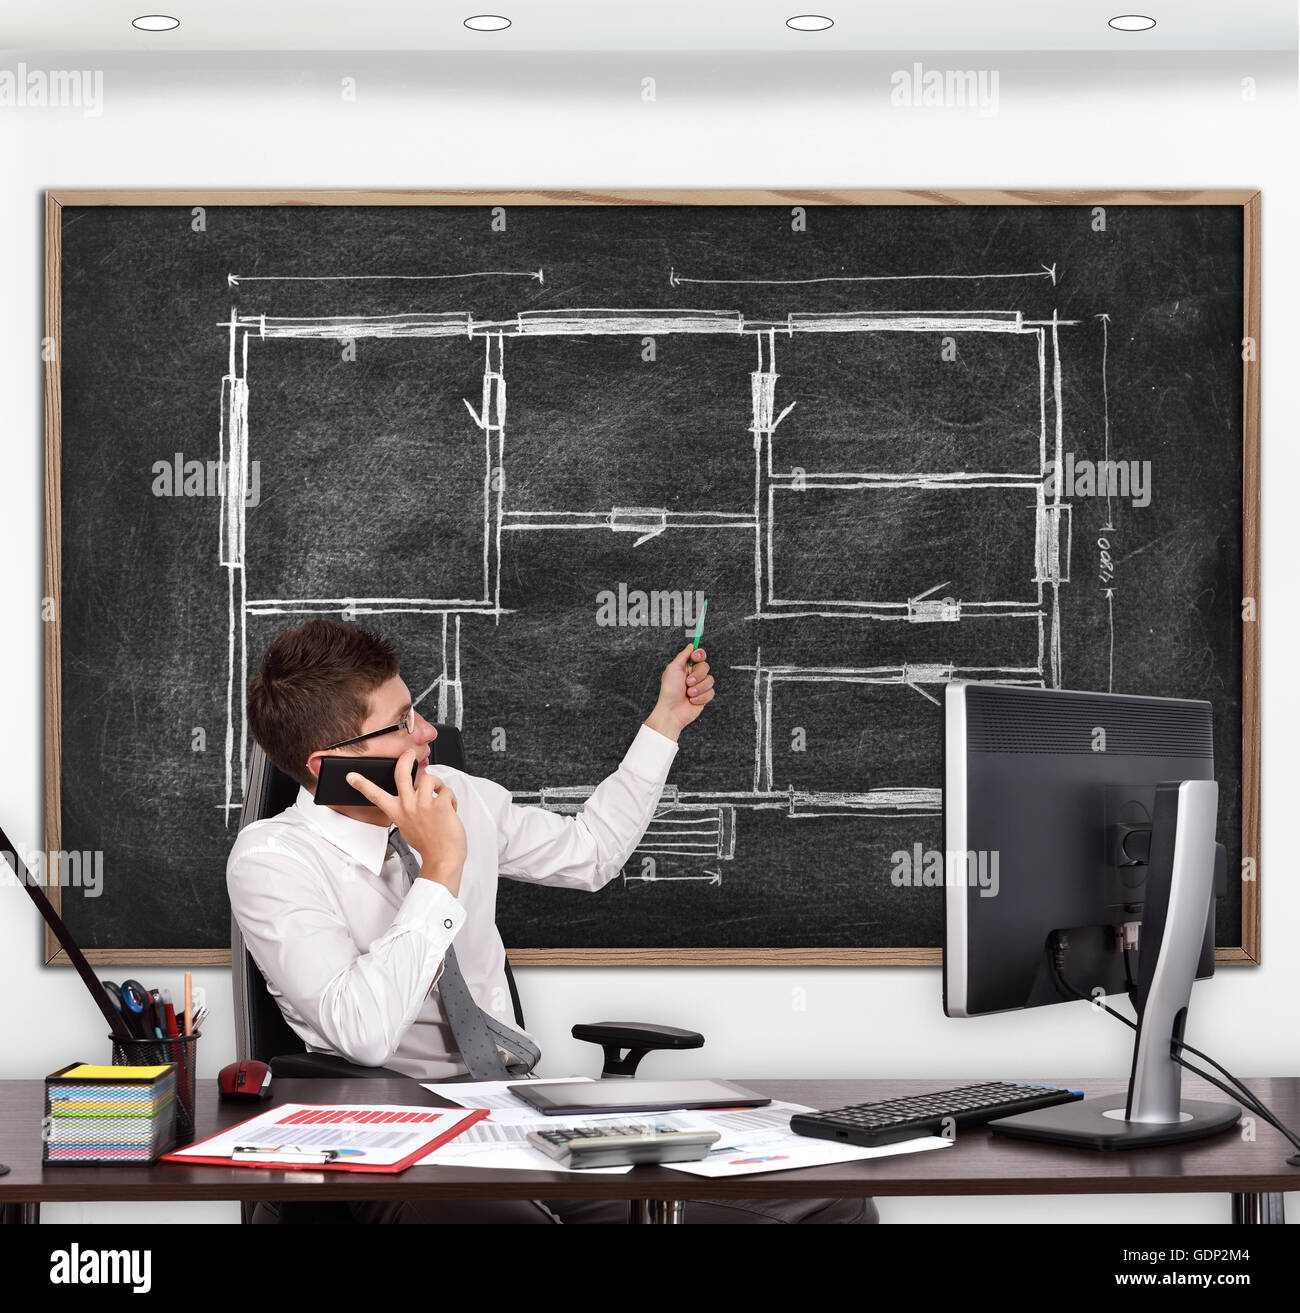 teacher in classroom pointing to blackboard with drawing blueprint Stock Photo